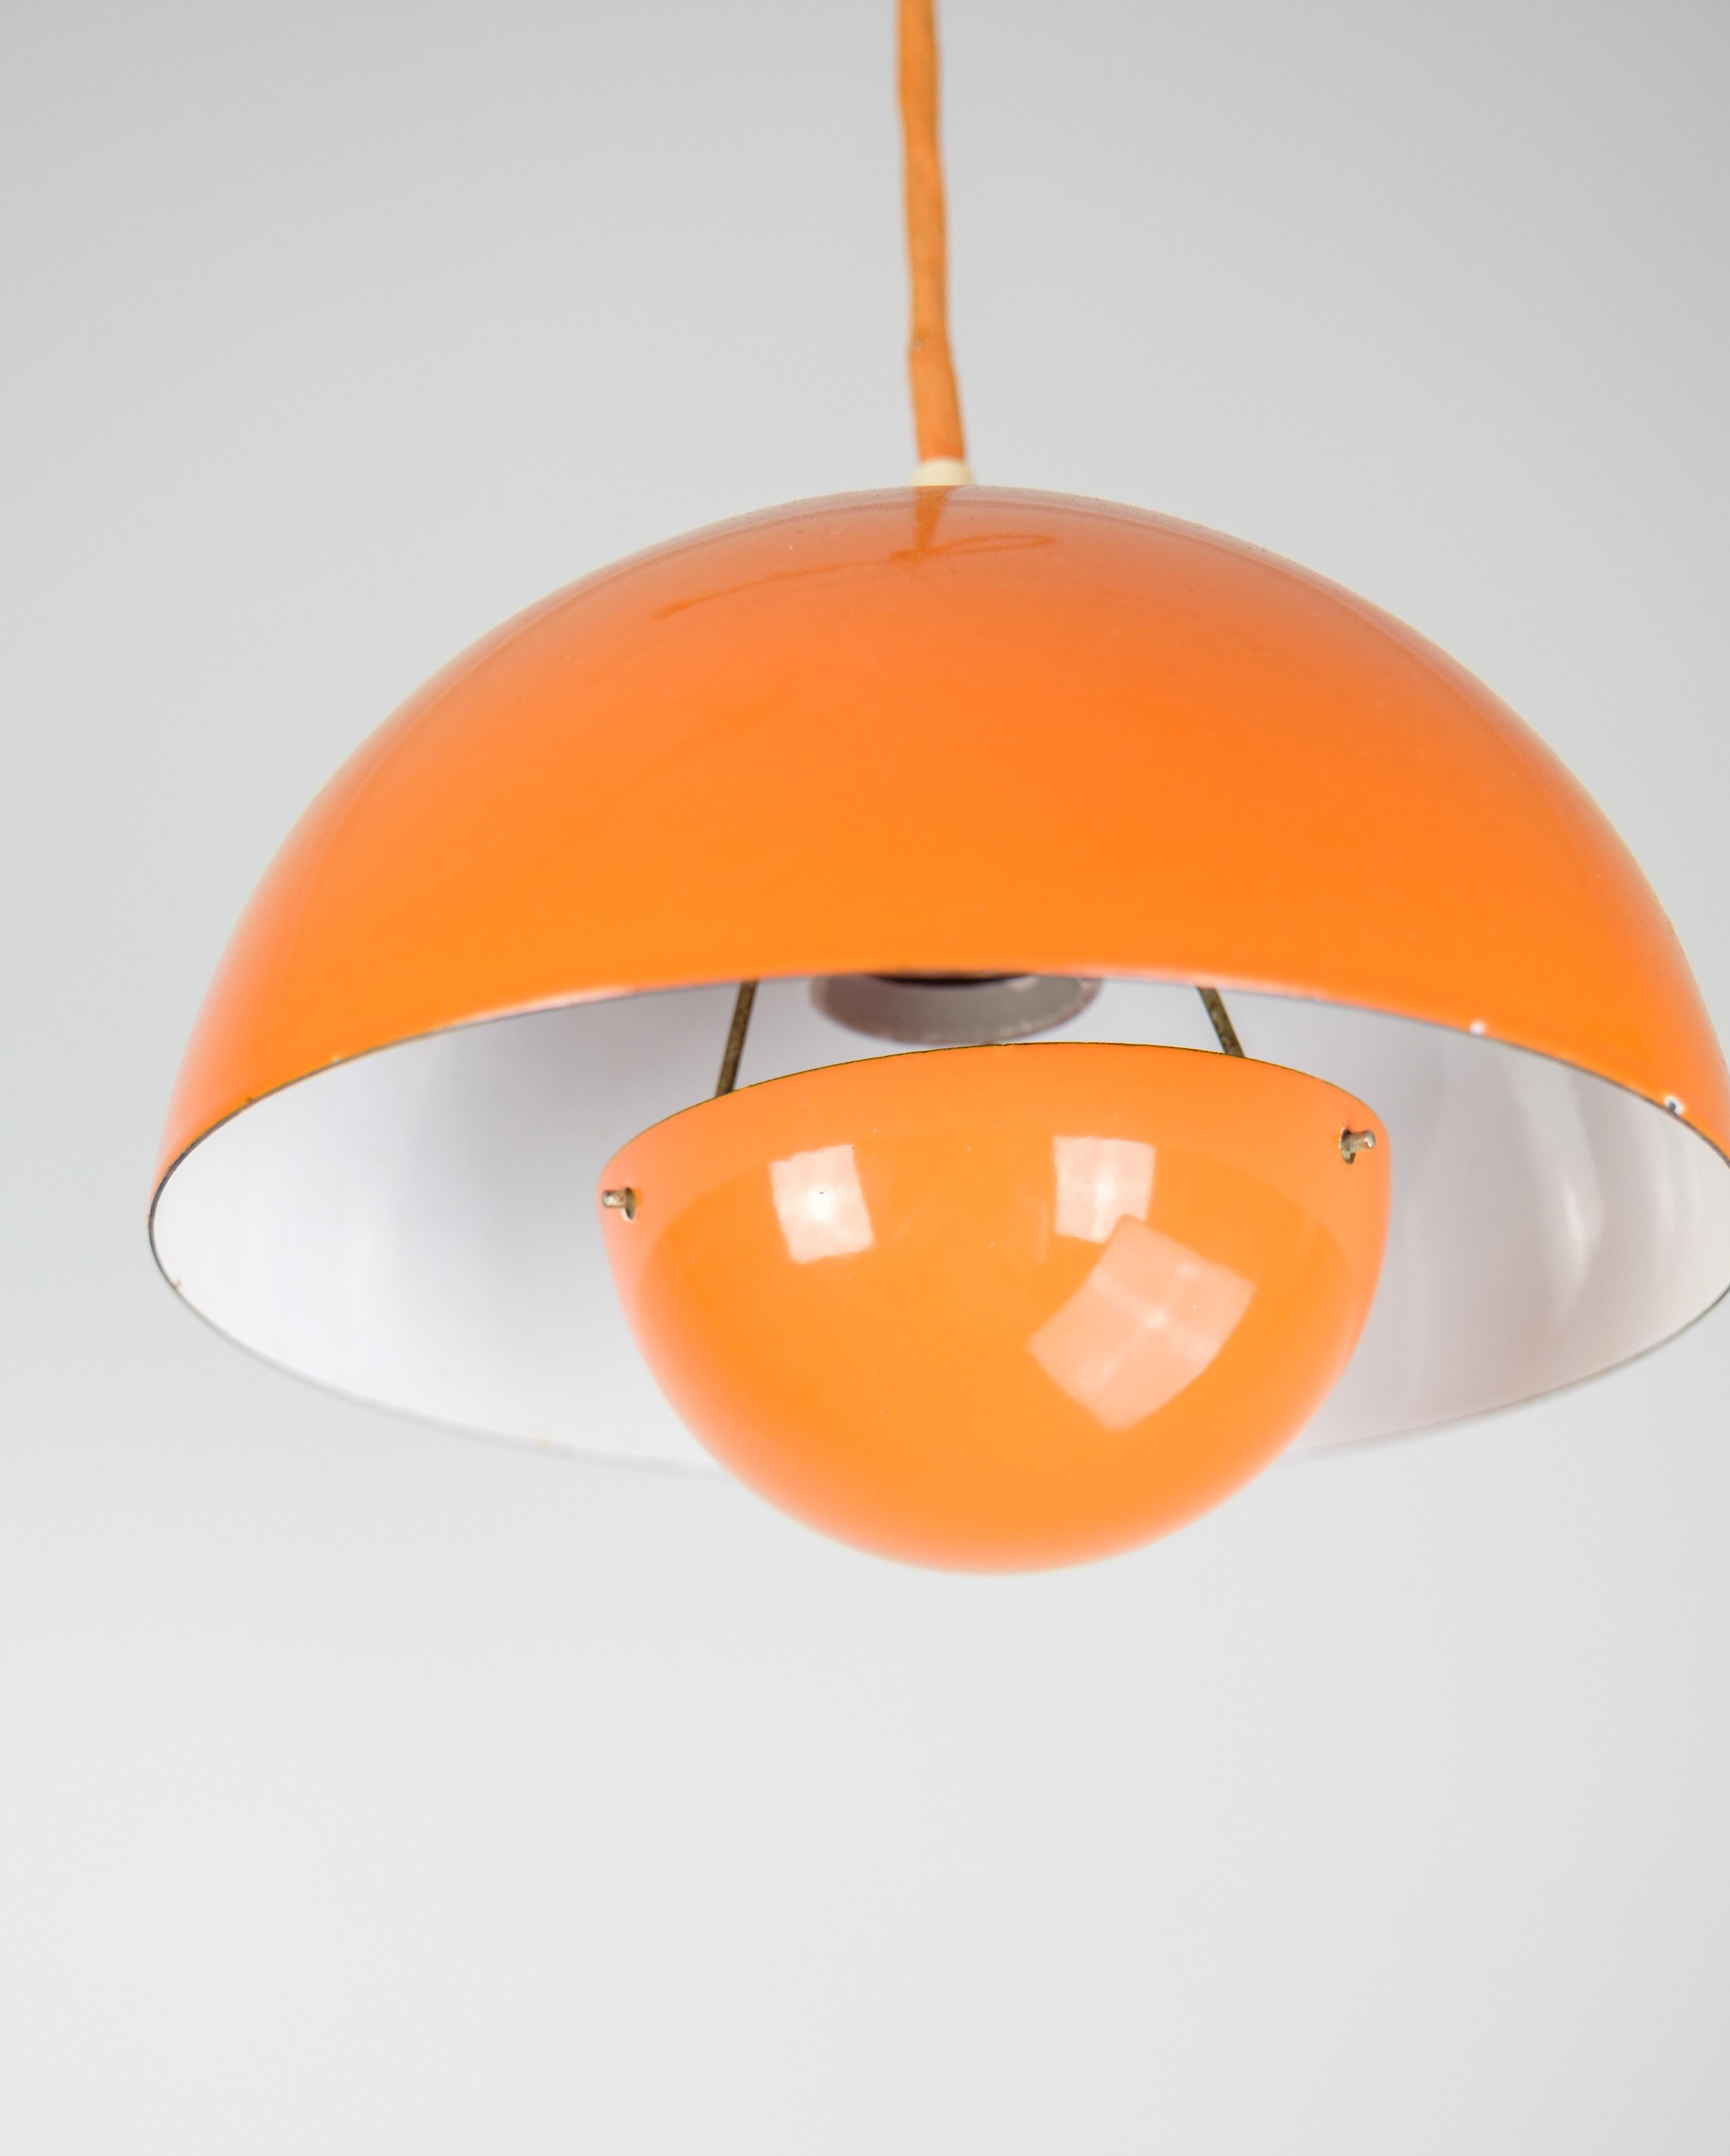 Flowerpot ceiling lamp, designed by Verner Panton (1926-1998) VP1 in yellow color from the 1970s.
Measures: H:15 dia:21.